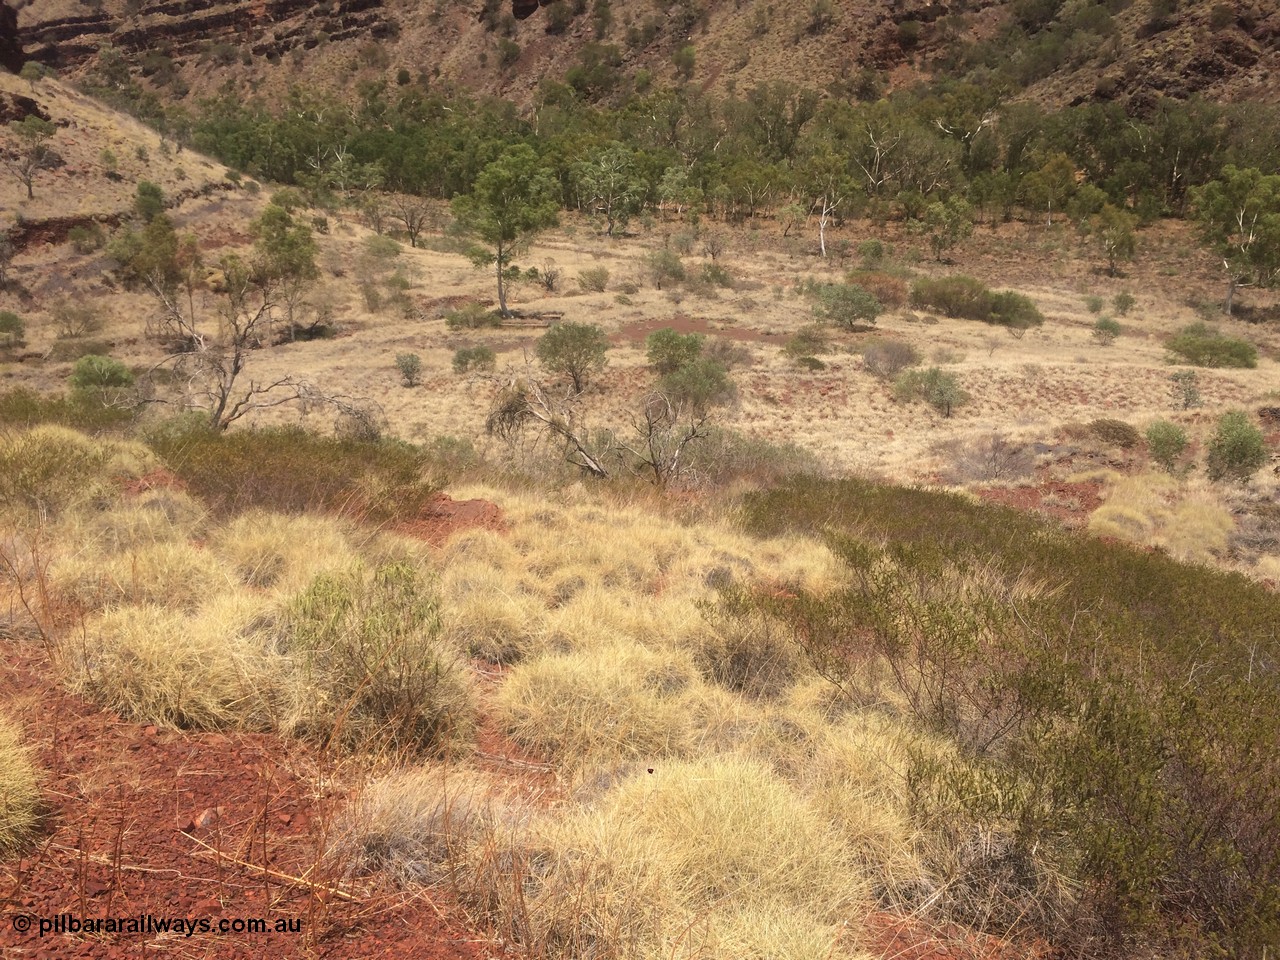 160101 2297
Wittenoom Gorge, location of former power station, shows tree growing through old foundations in the middle background, looking north west from approx. engine hall location, geodata: [url=https://goo.gl/maps/Y78Egje7Lt52] -22.3222583 118.3340833 [/url], iPhone 5S image.
